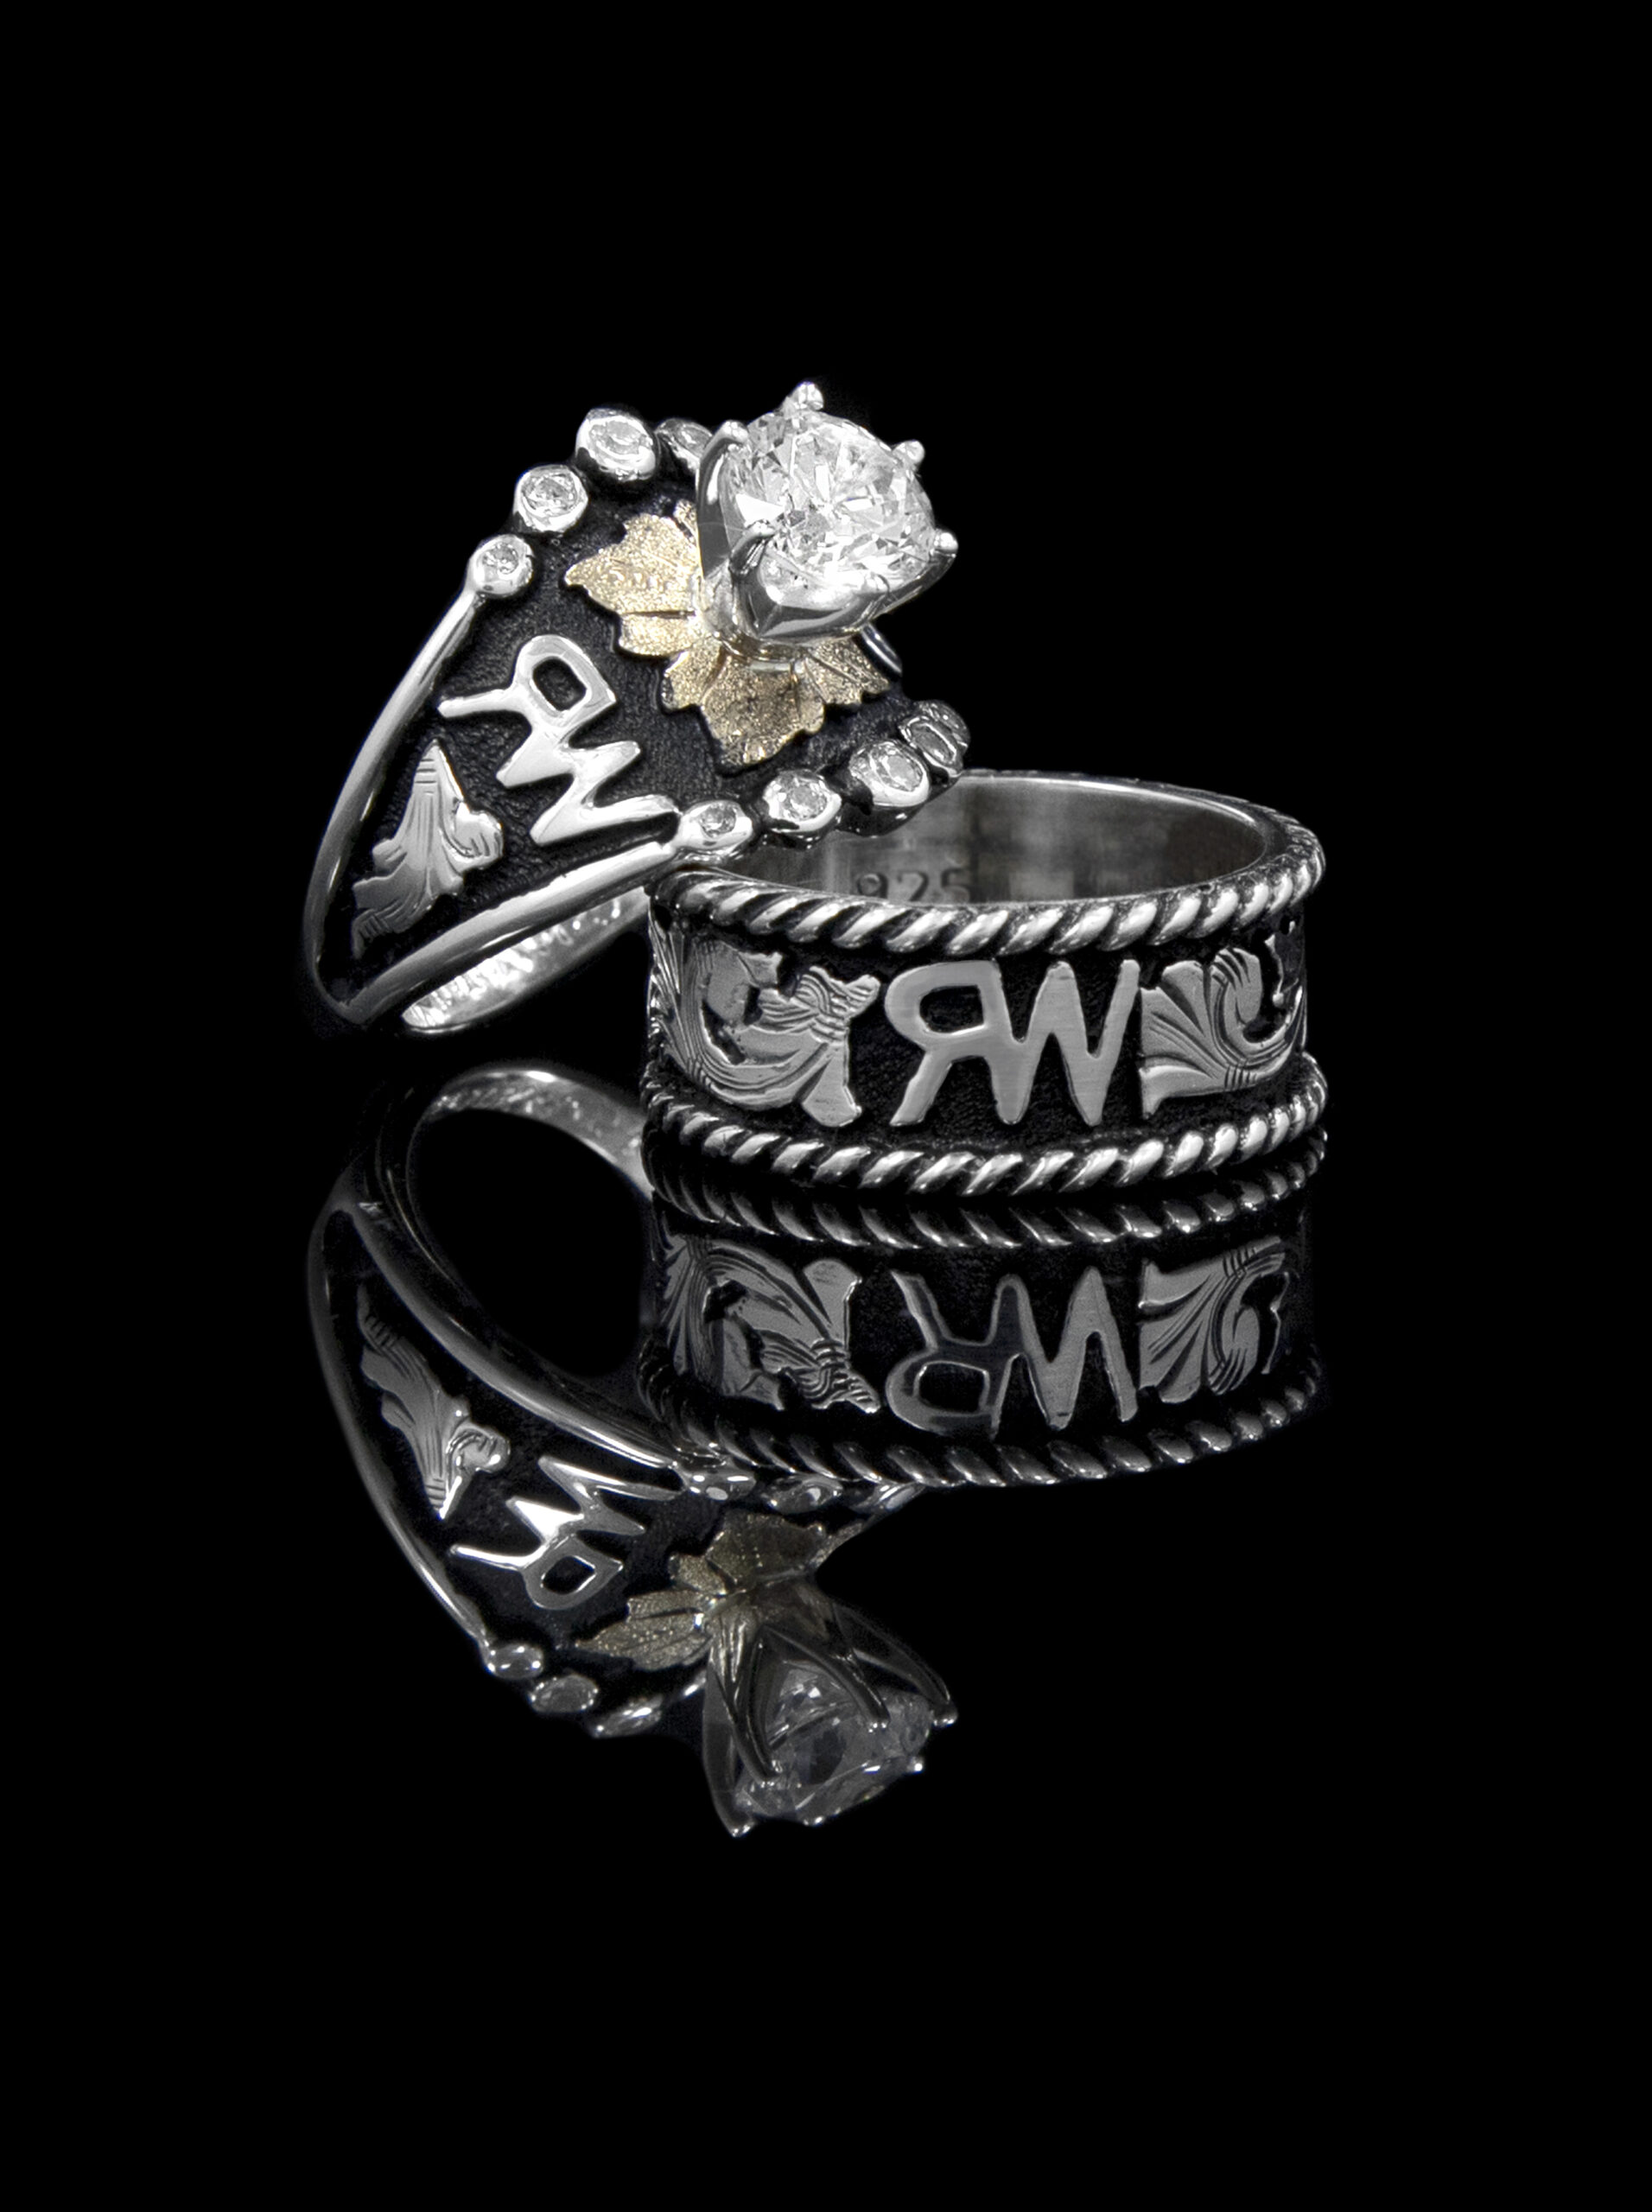 https://hyosilver.com/wp-content/uploads/2014/07/Cherish-Forever-Ring-Set-Silver-Scrolls-with-Black-Background-scaled.jpg